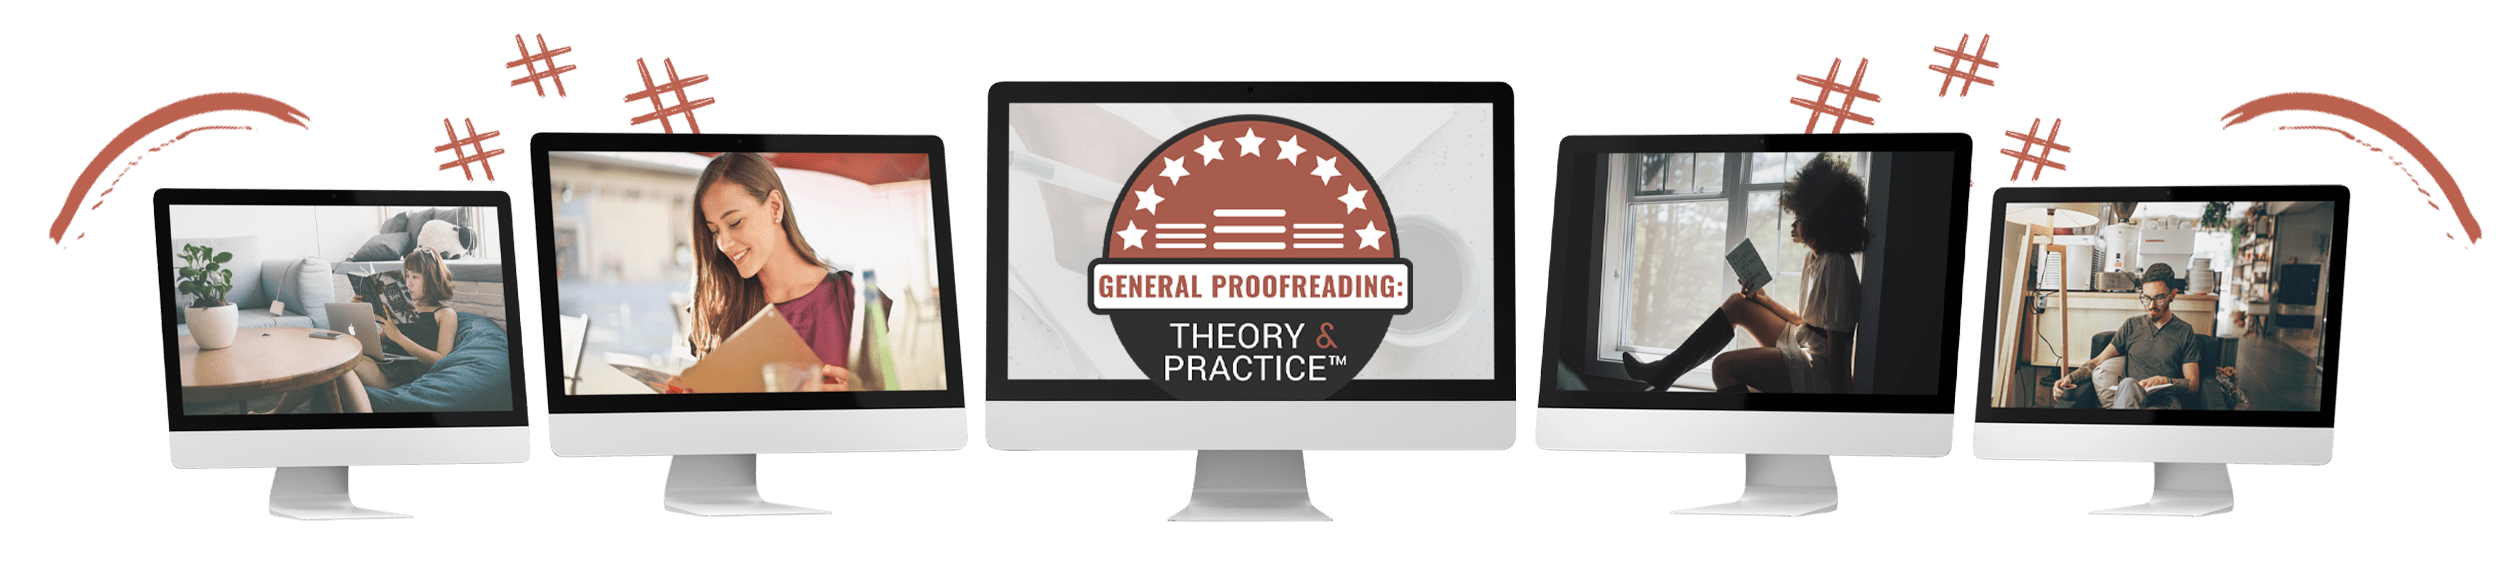 General proofreading examples